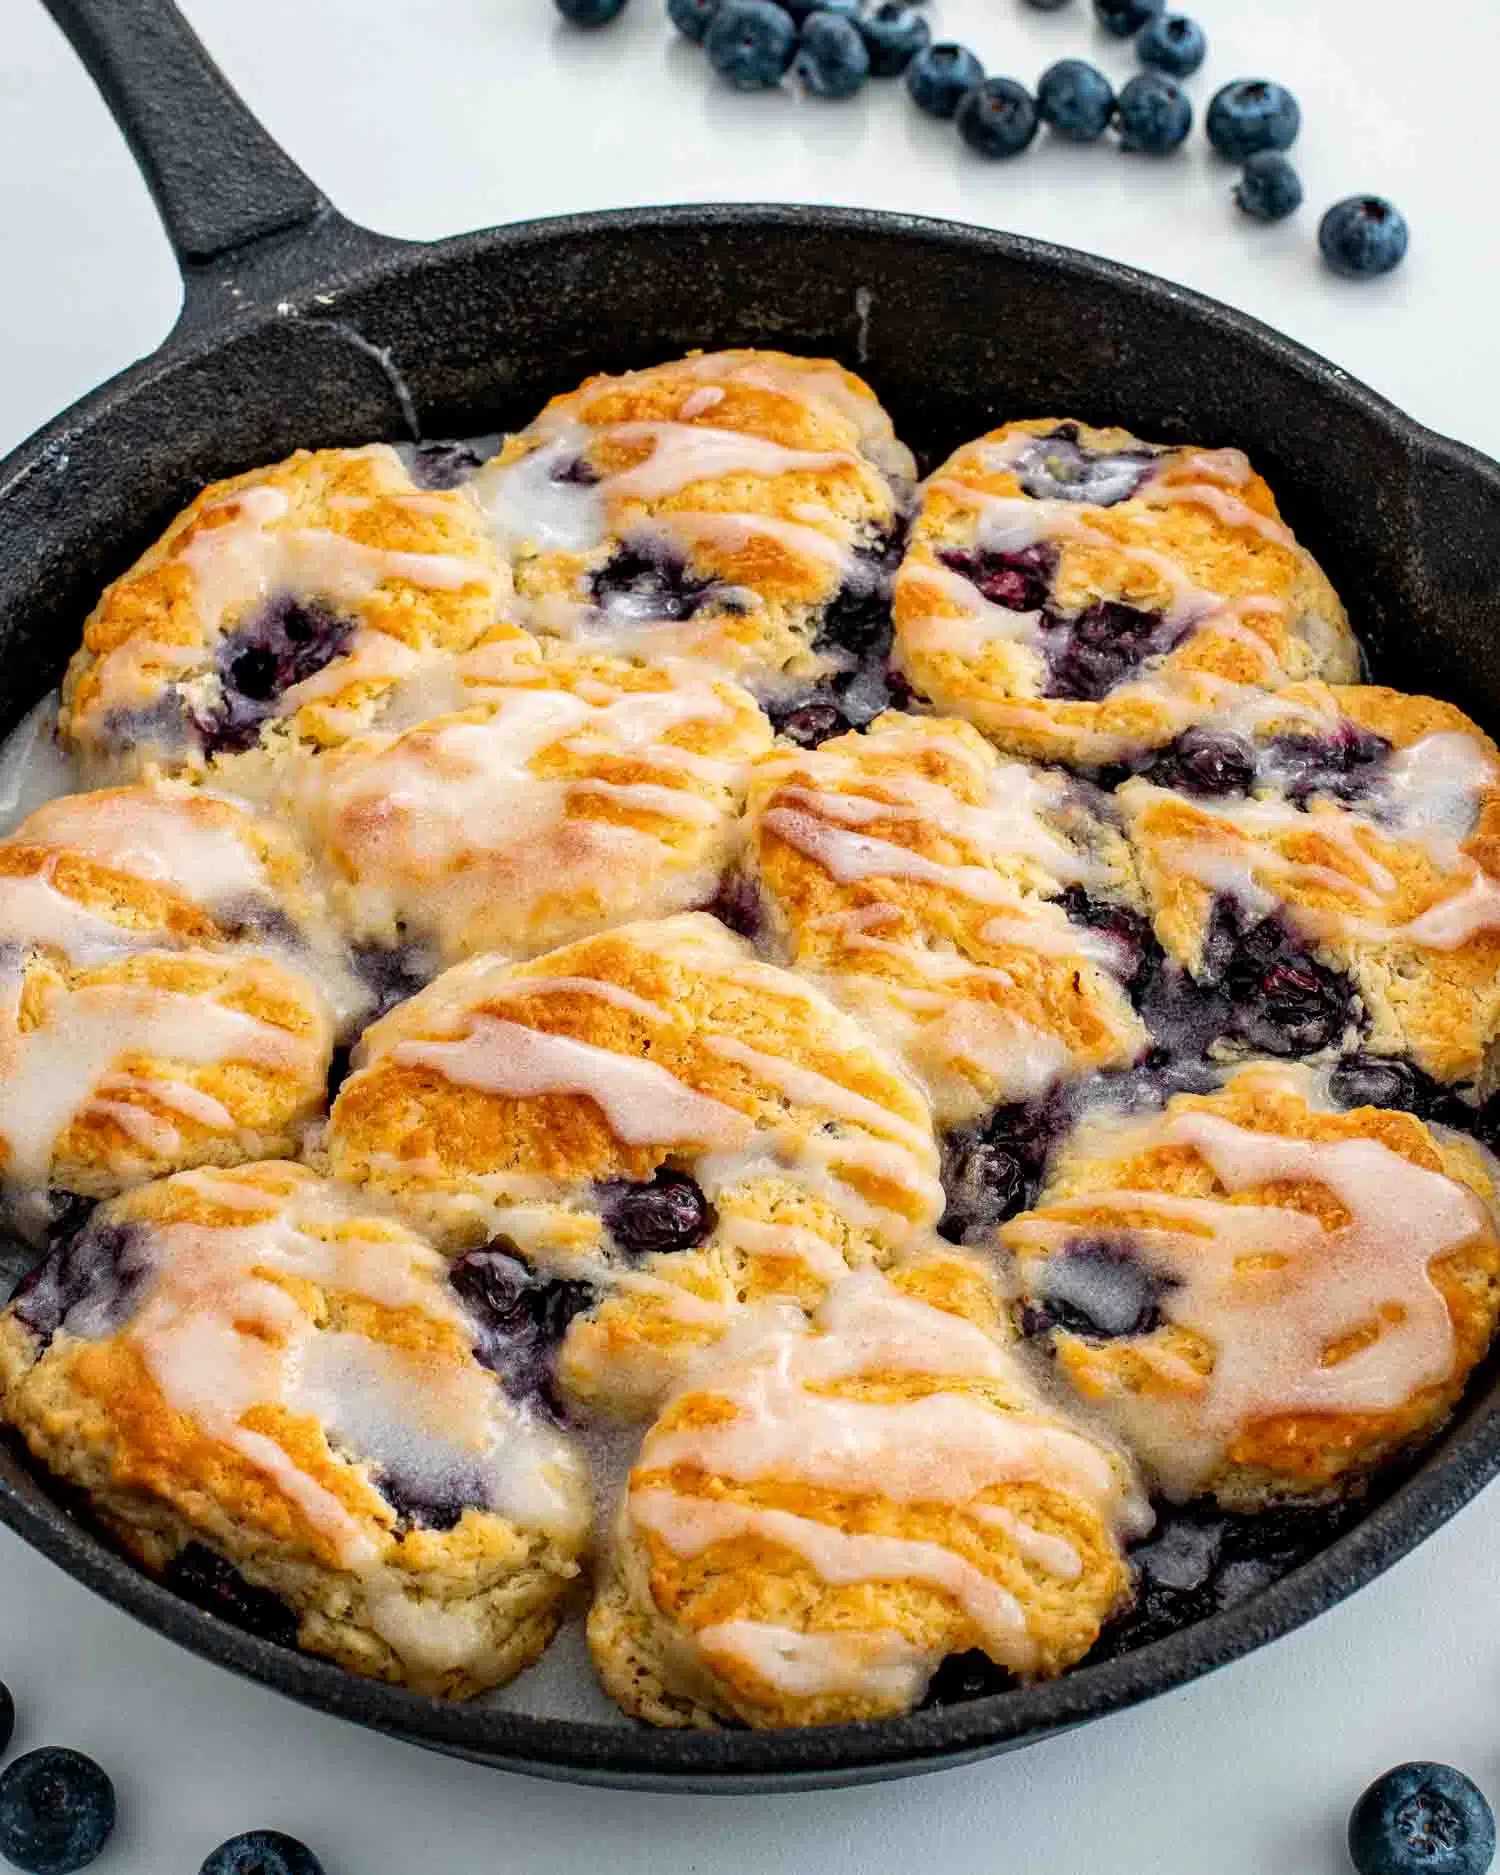 freshly baked blueberry biscuits in a black cast iron skillet.